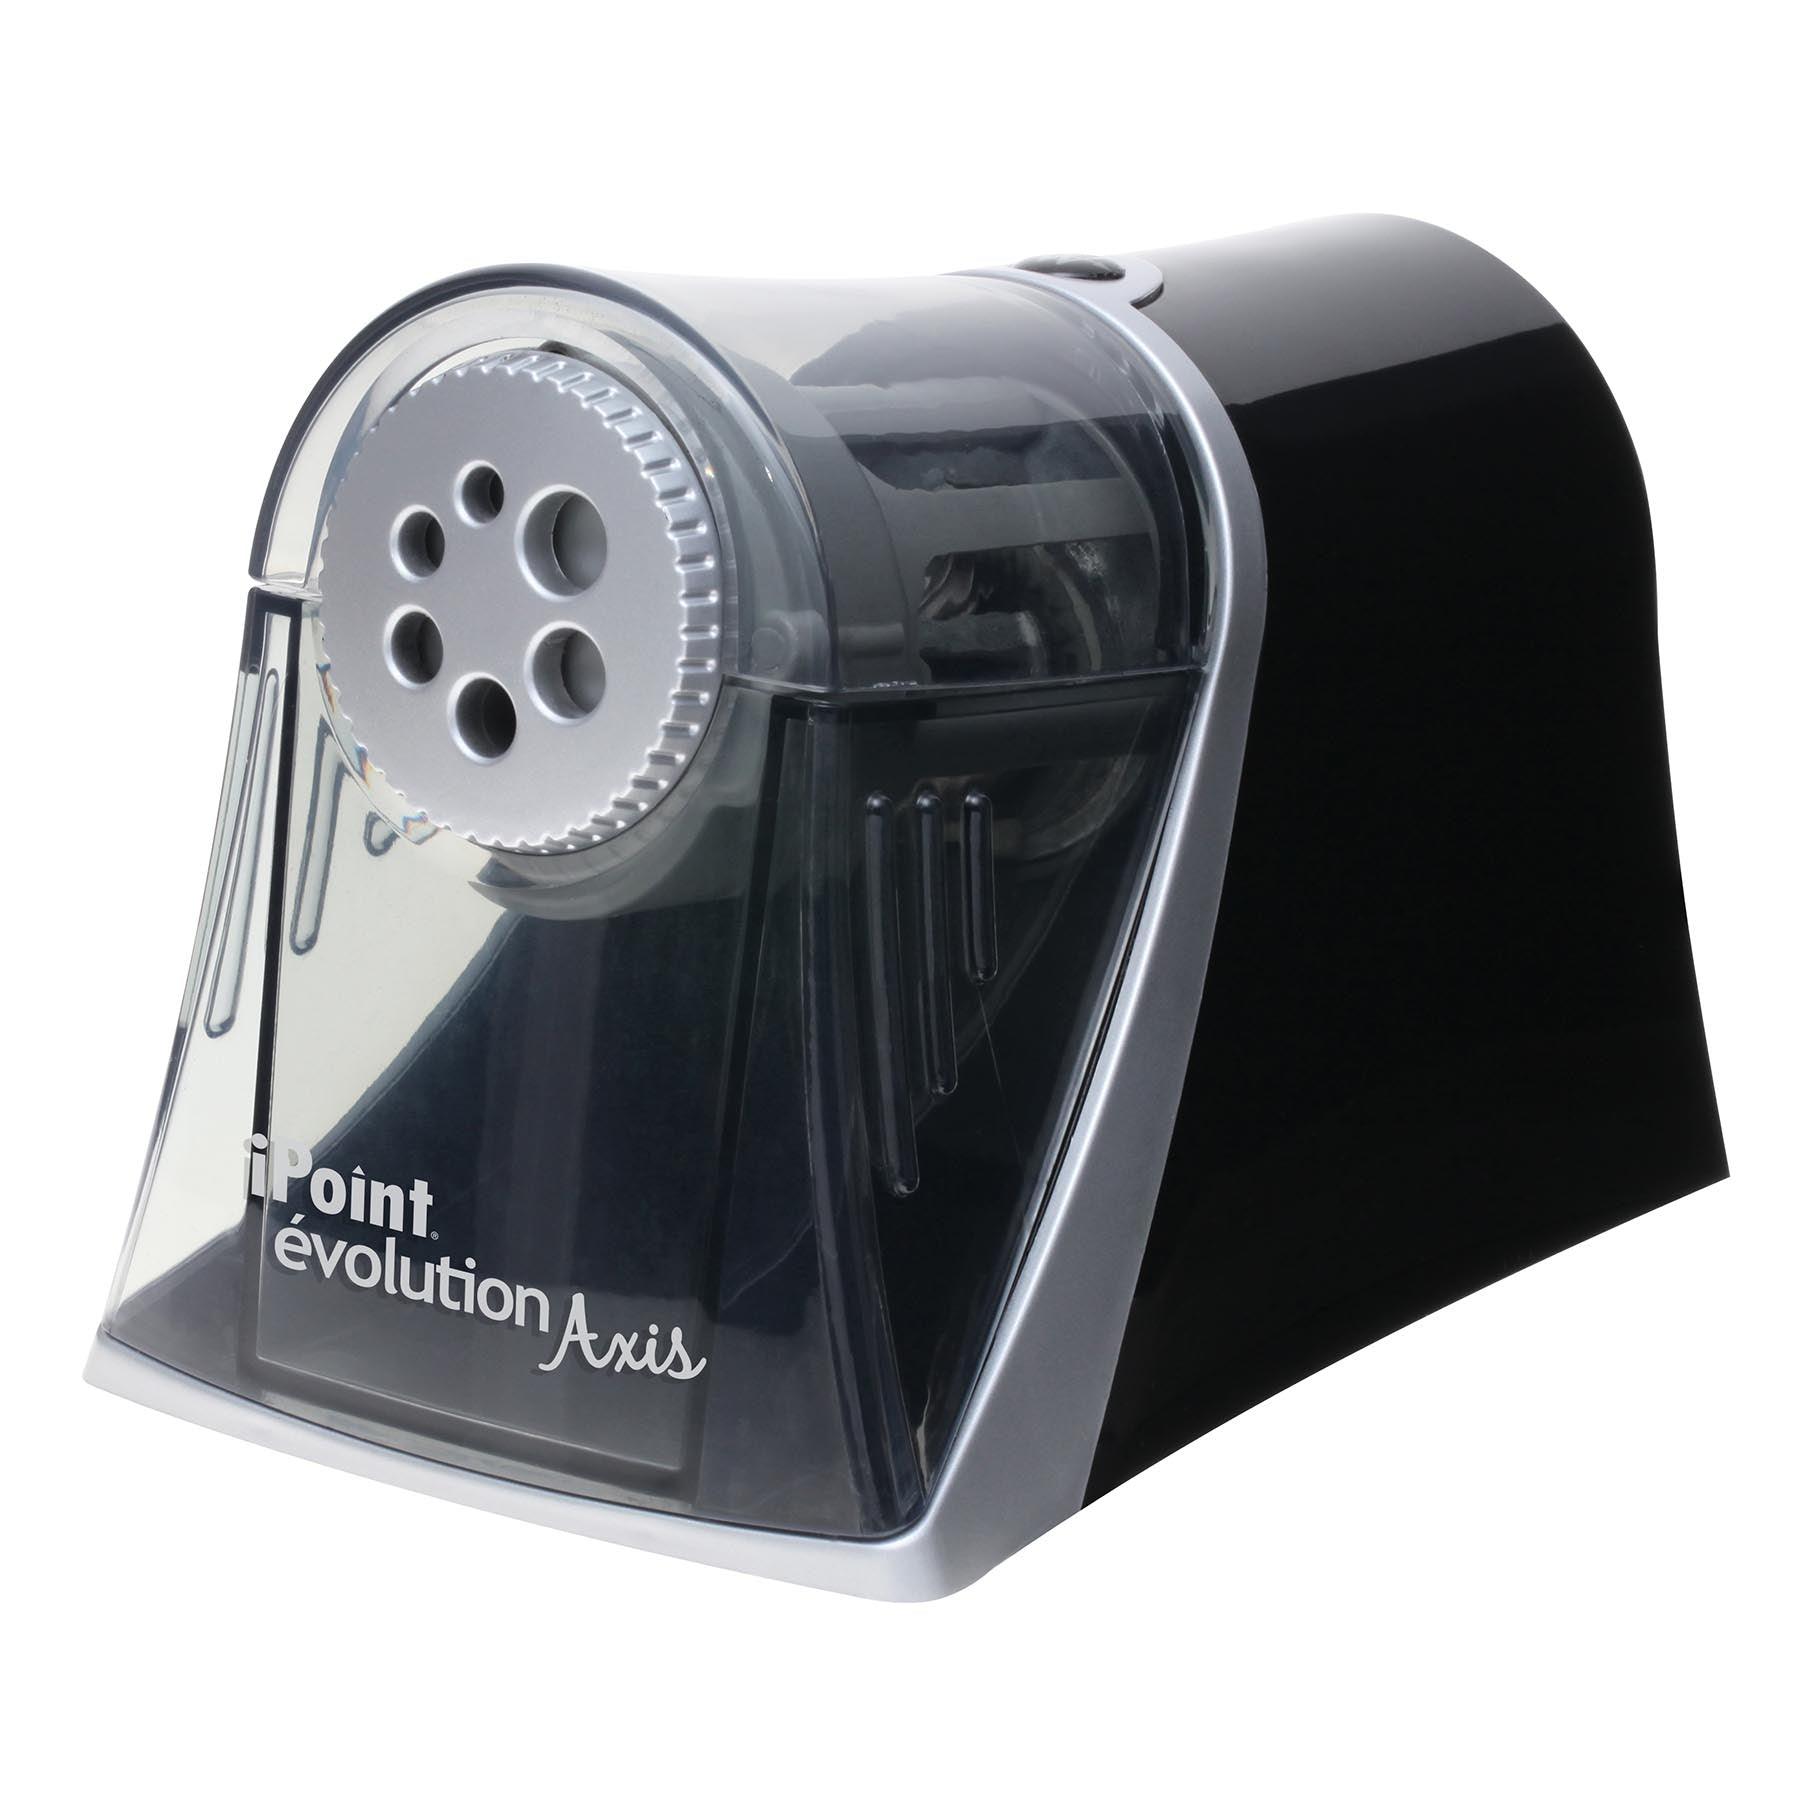 iPoint Evolution Axis Heavy Duty Electric Pencil Sharpener, Black/Silver - Loomini